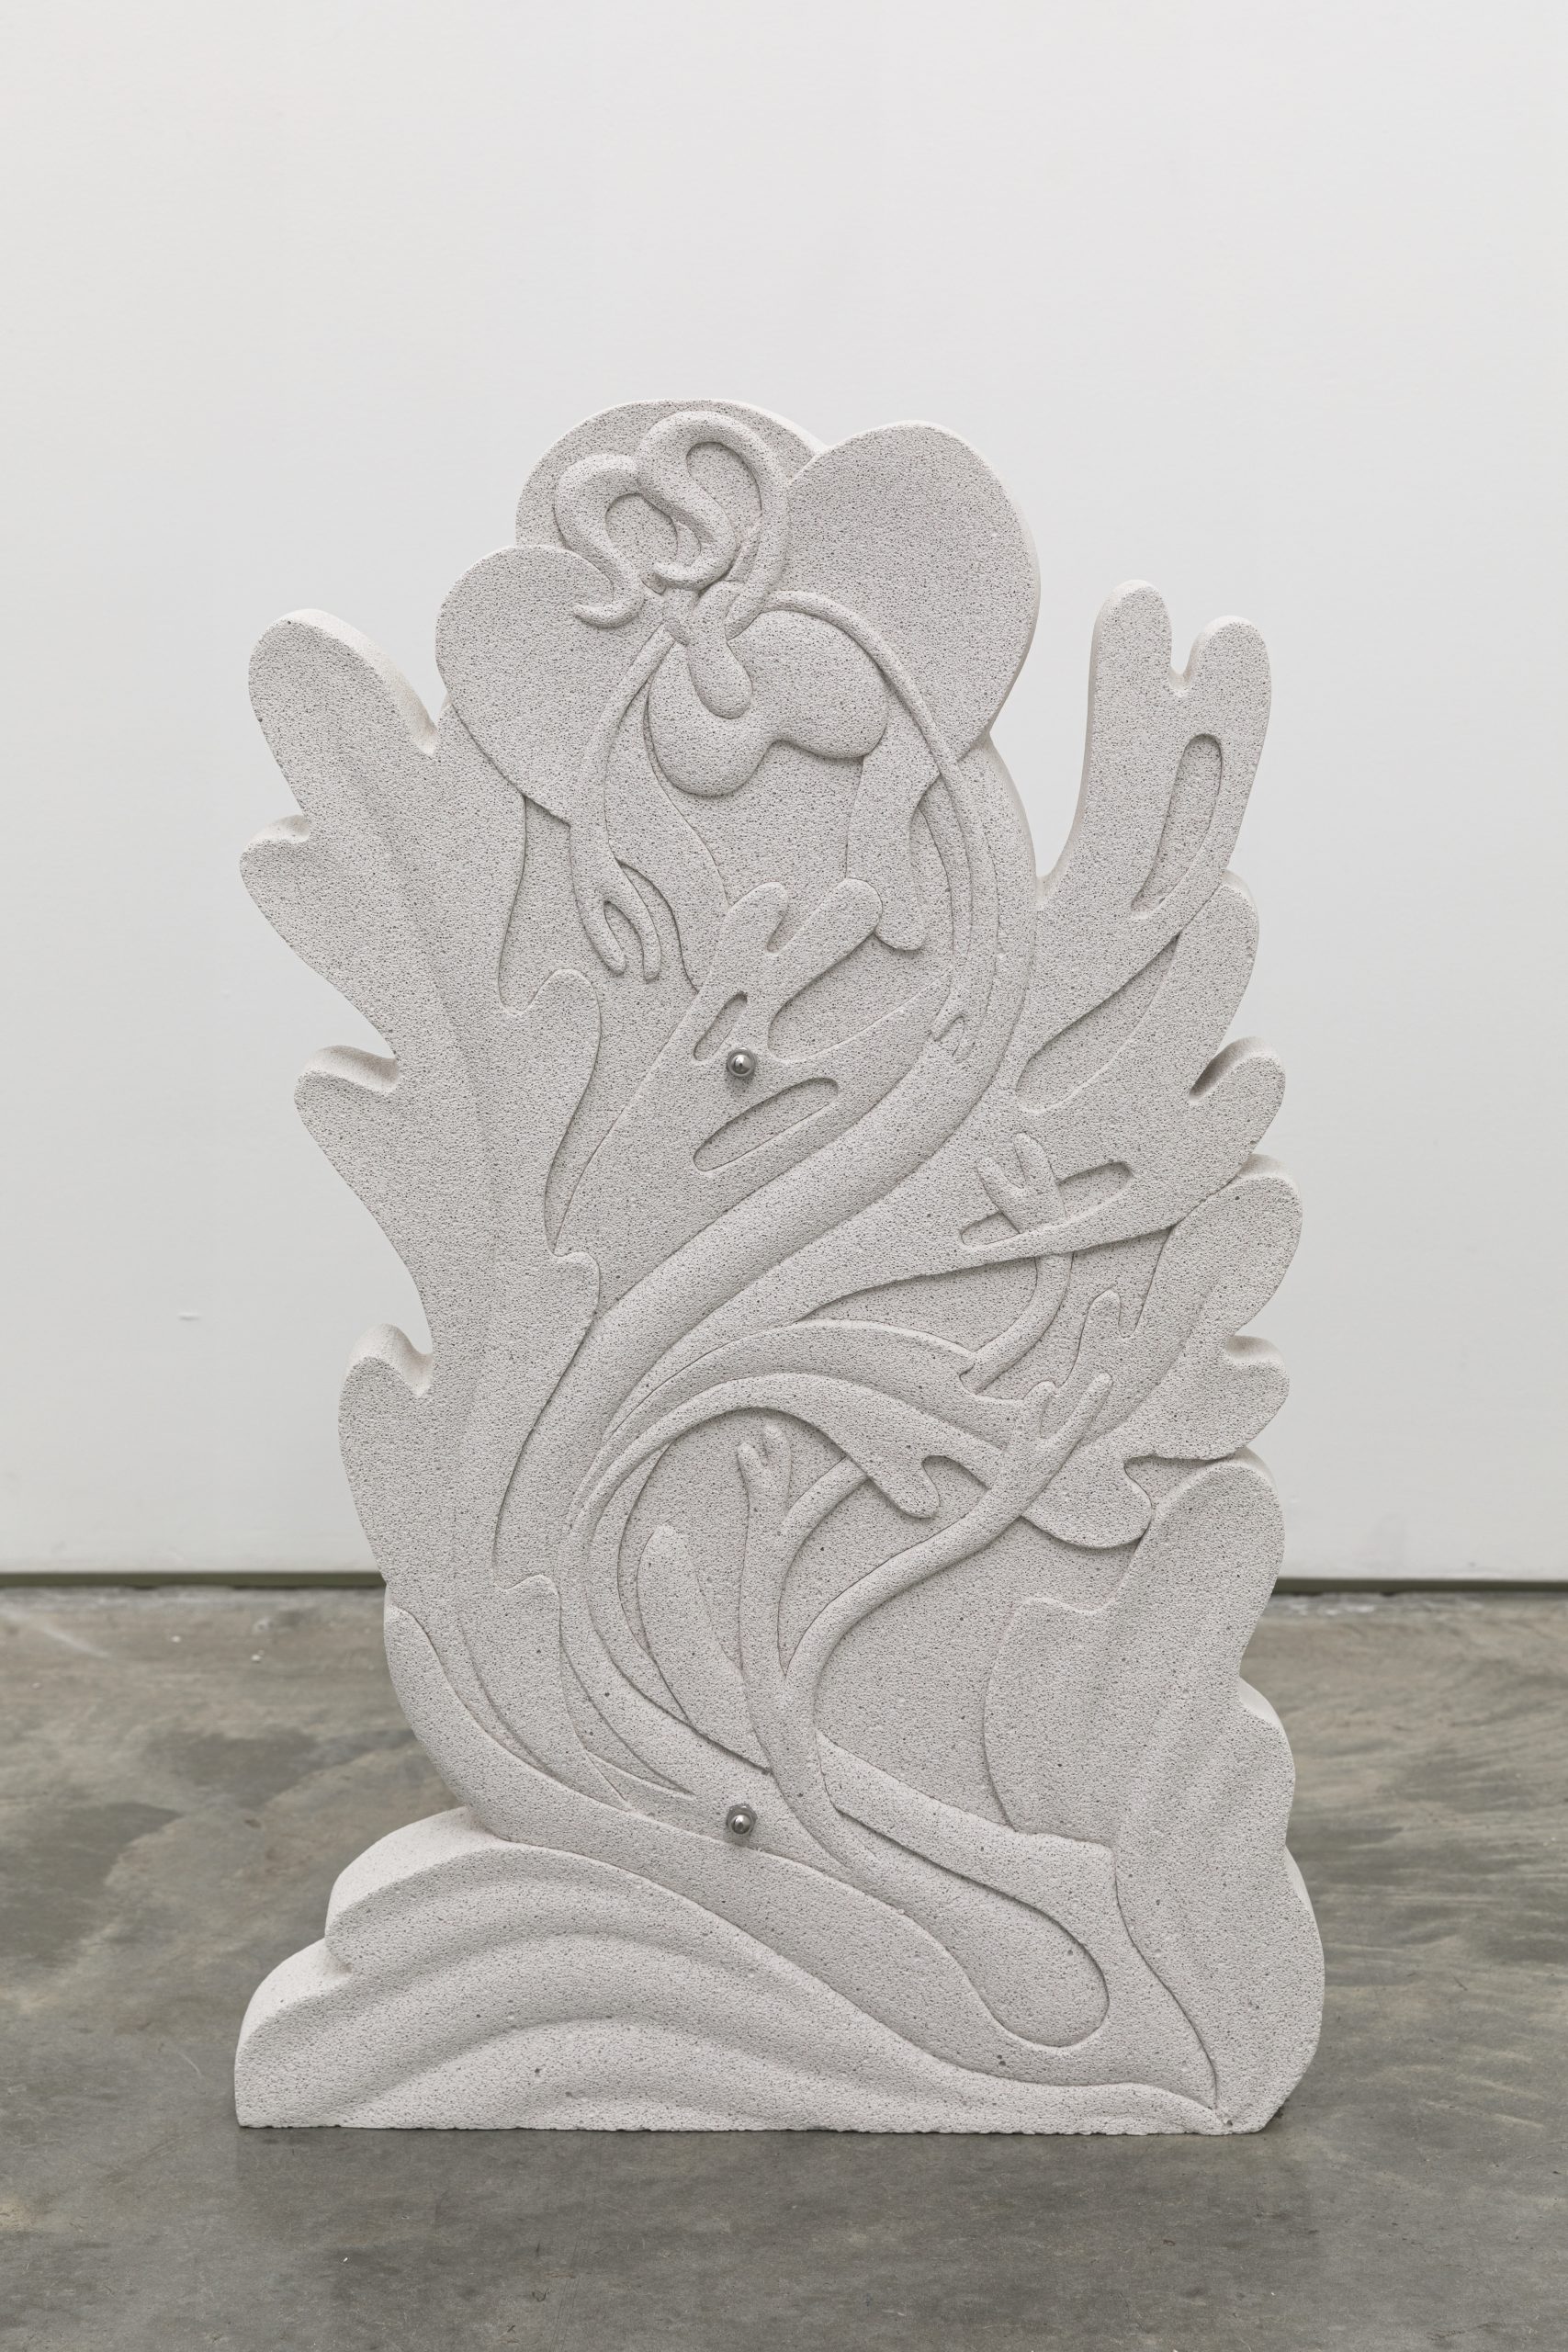 Image: Sif Itona Westerberg, Glitch/Growth II, 2022. Image credit: courtesy of the artist and Gether Contemporary, Copenhagen. A cast concrete depicts a flower growing upward, surrounded by flowing leaf fronds. Two steel bolts are visible in the lower and upper half of the cast.